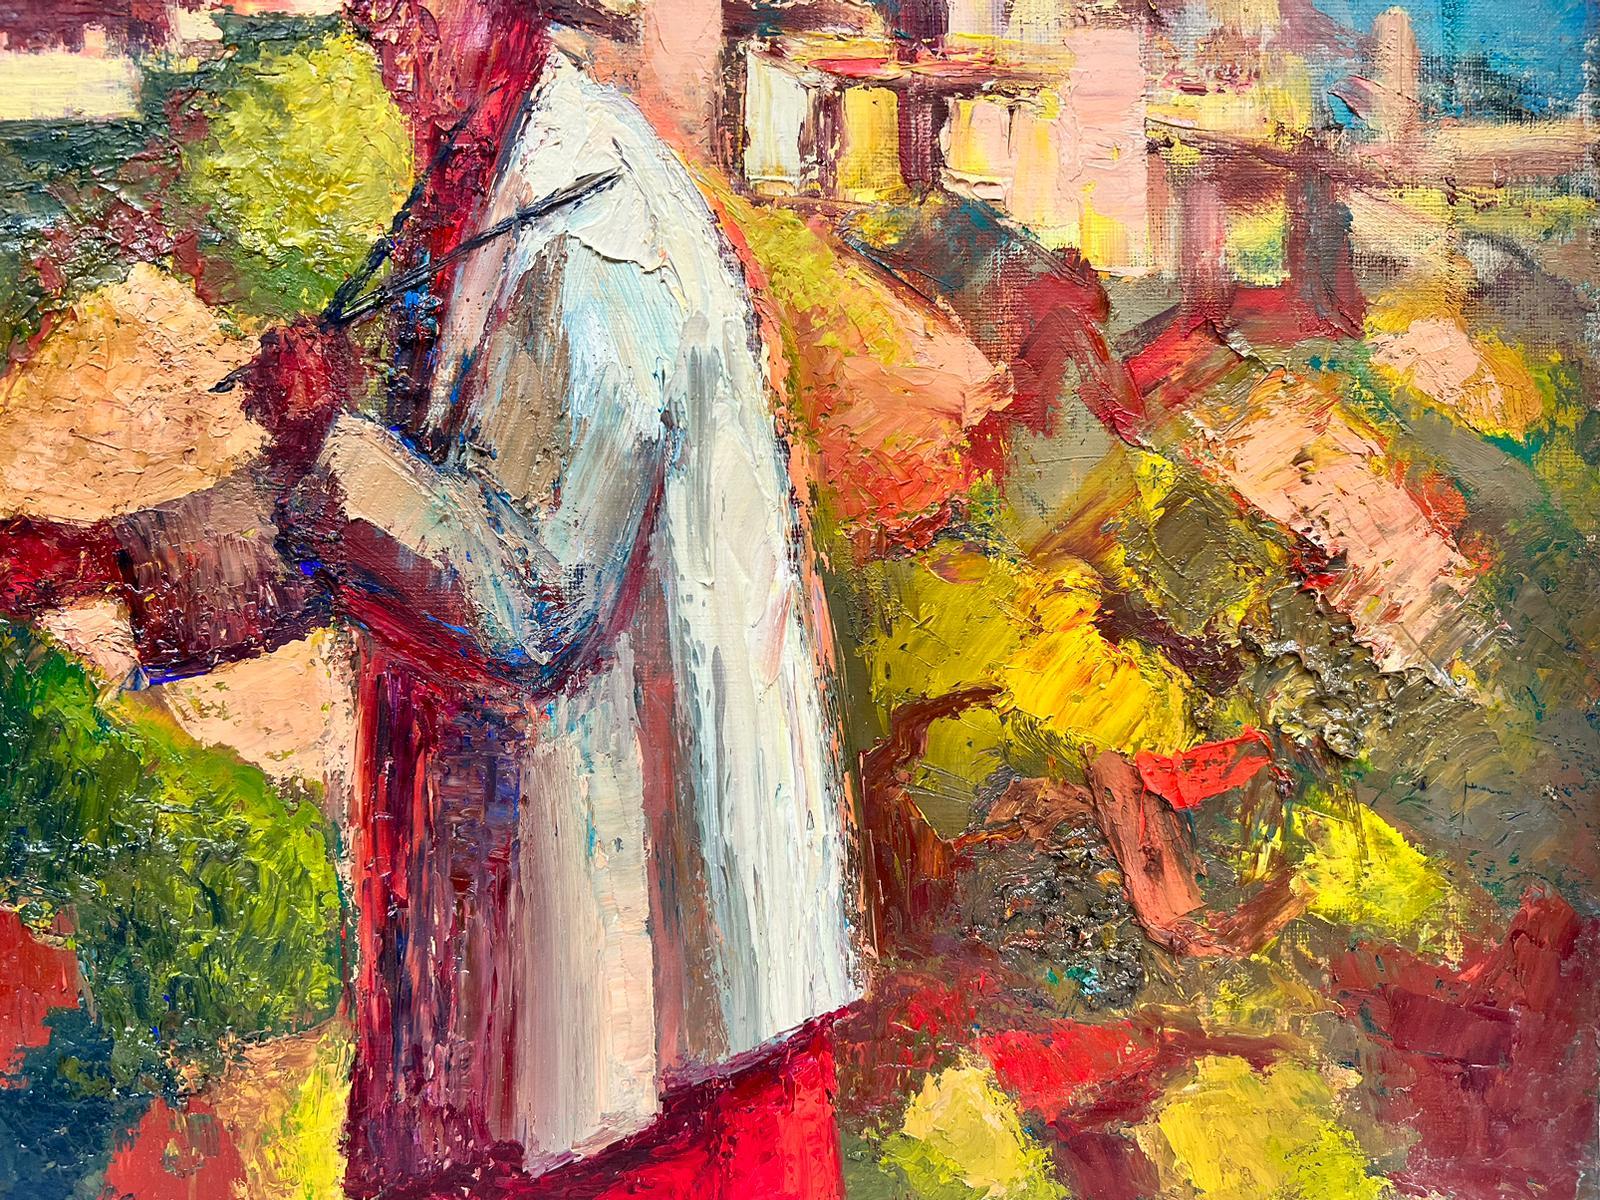 The Provencal Painter
by Josine Vignon (French 1922-2022)
oil painting on canvas, unframed

canvas: 18 x 21.5 inches

Colors: Red colors, orange, yellow, pink, green, browns and beige

Very good condition, though the stretcher bar indentation shows